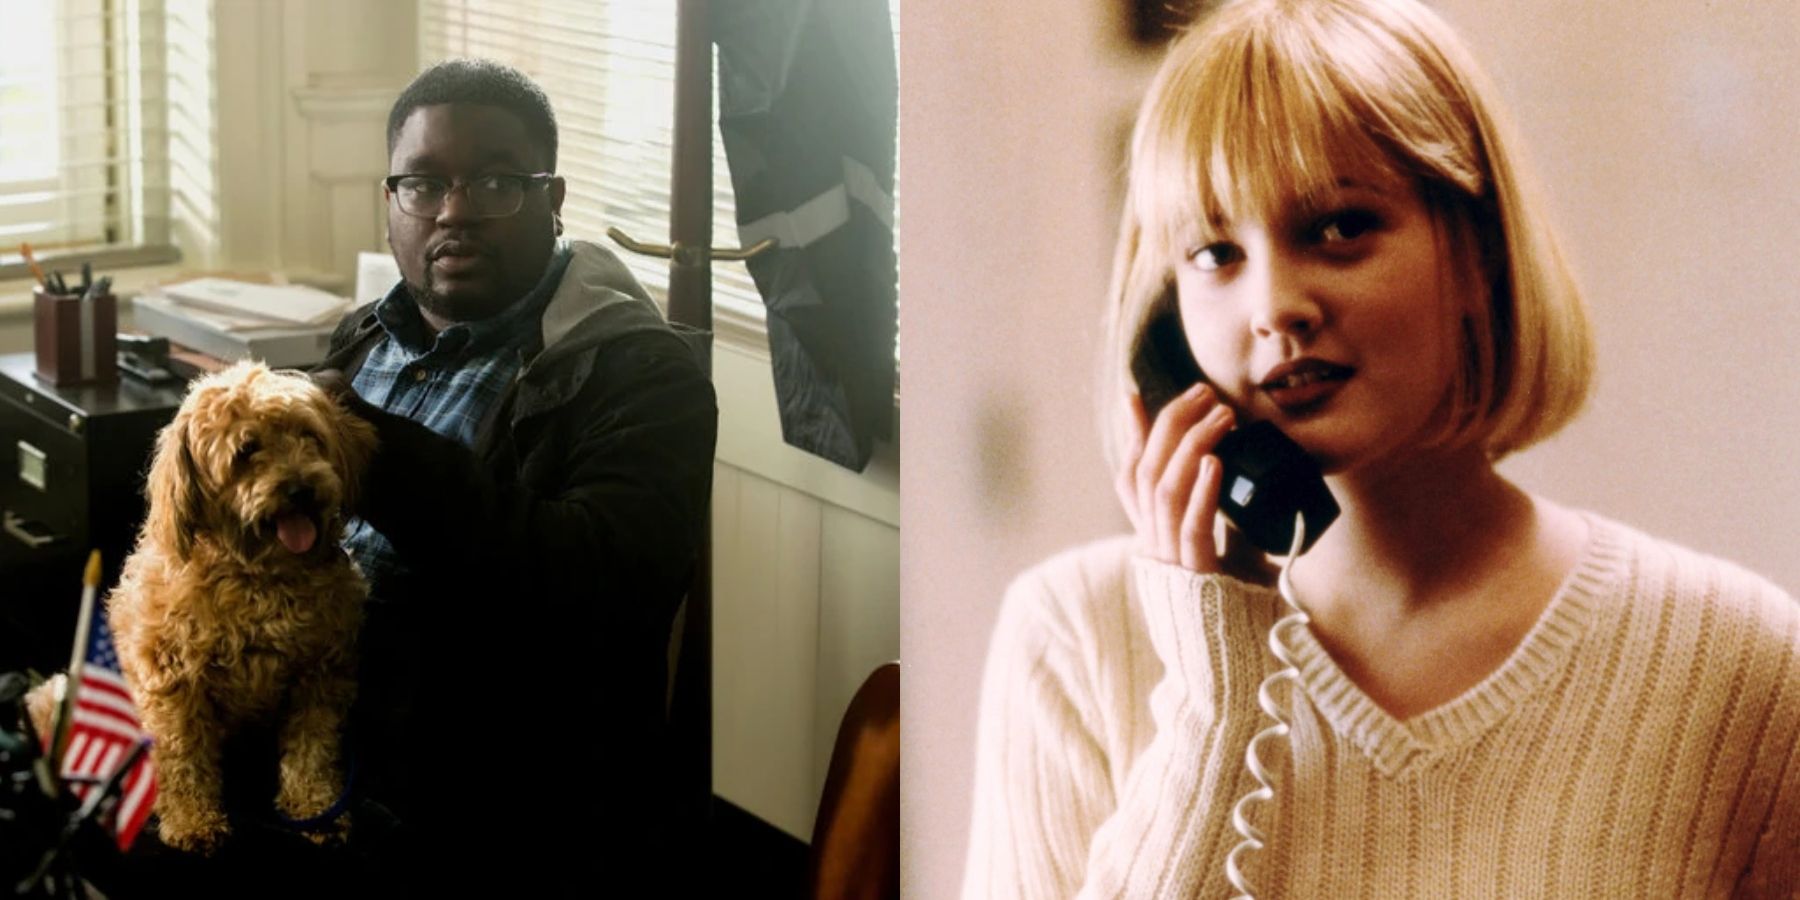 Split image of Rod Williams (Lil Rel Howery) in Get Out and Casey Becker (Drew Barrymore) in Scream